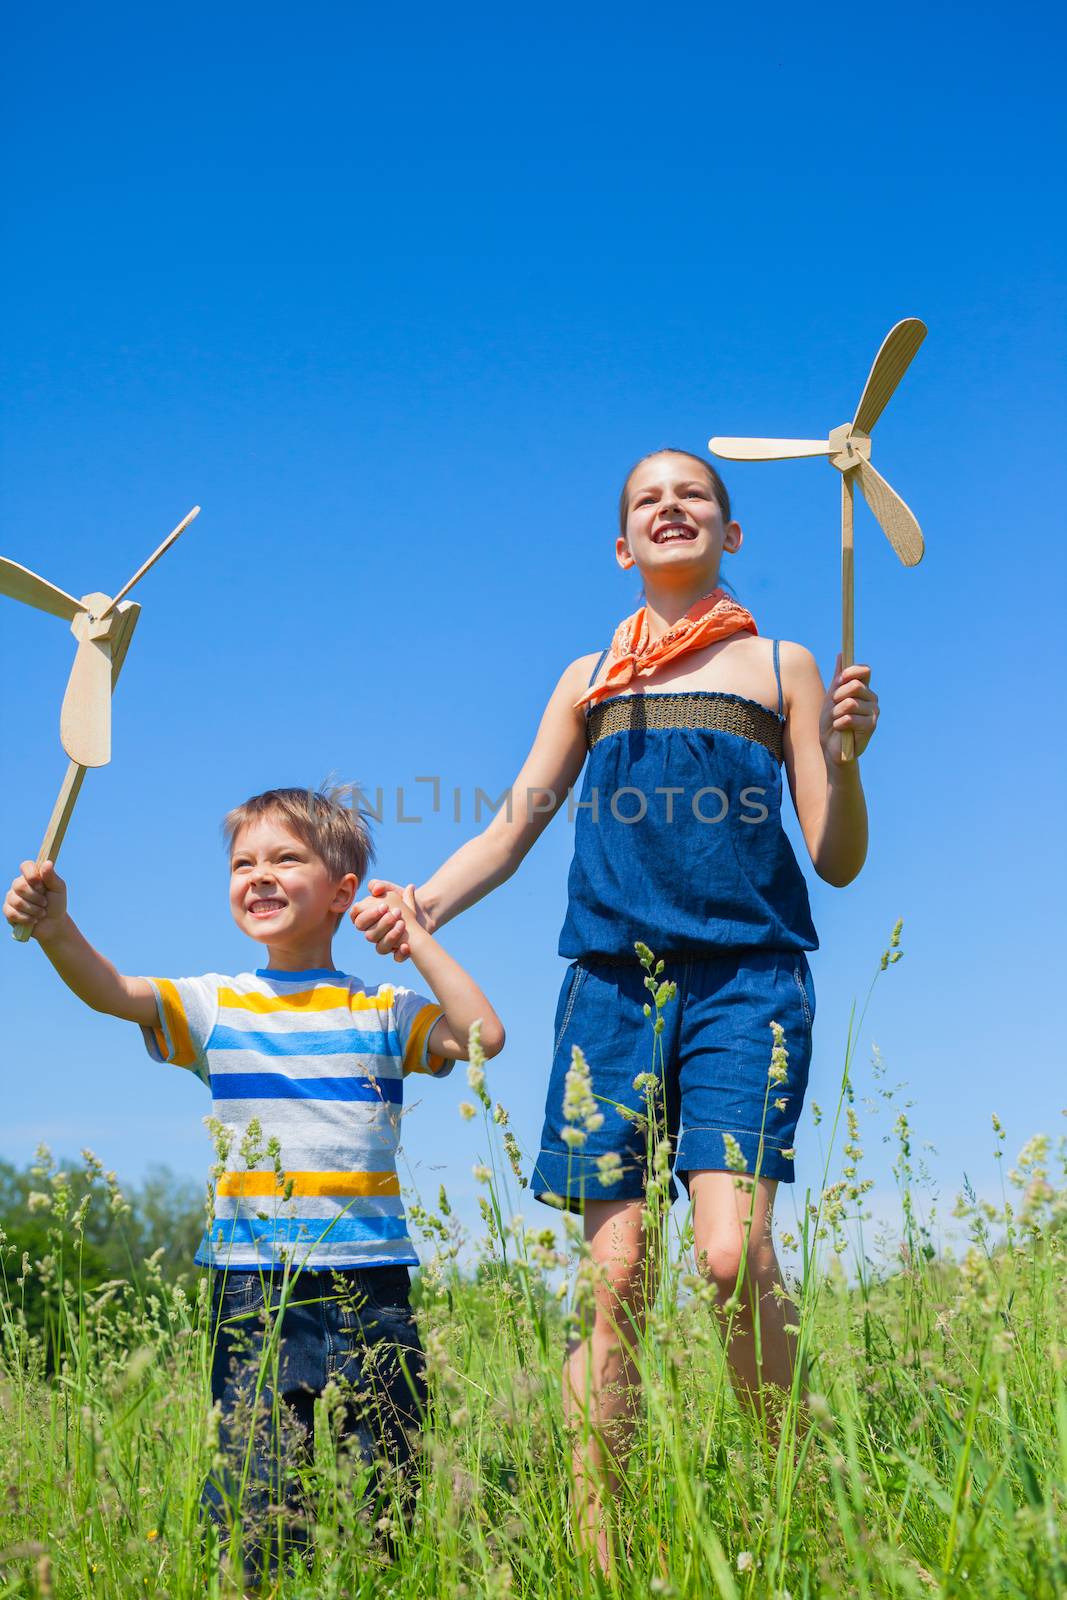 Cute kids runing on grass in summer day holds wooden windmill in hand